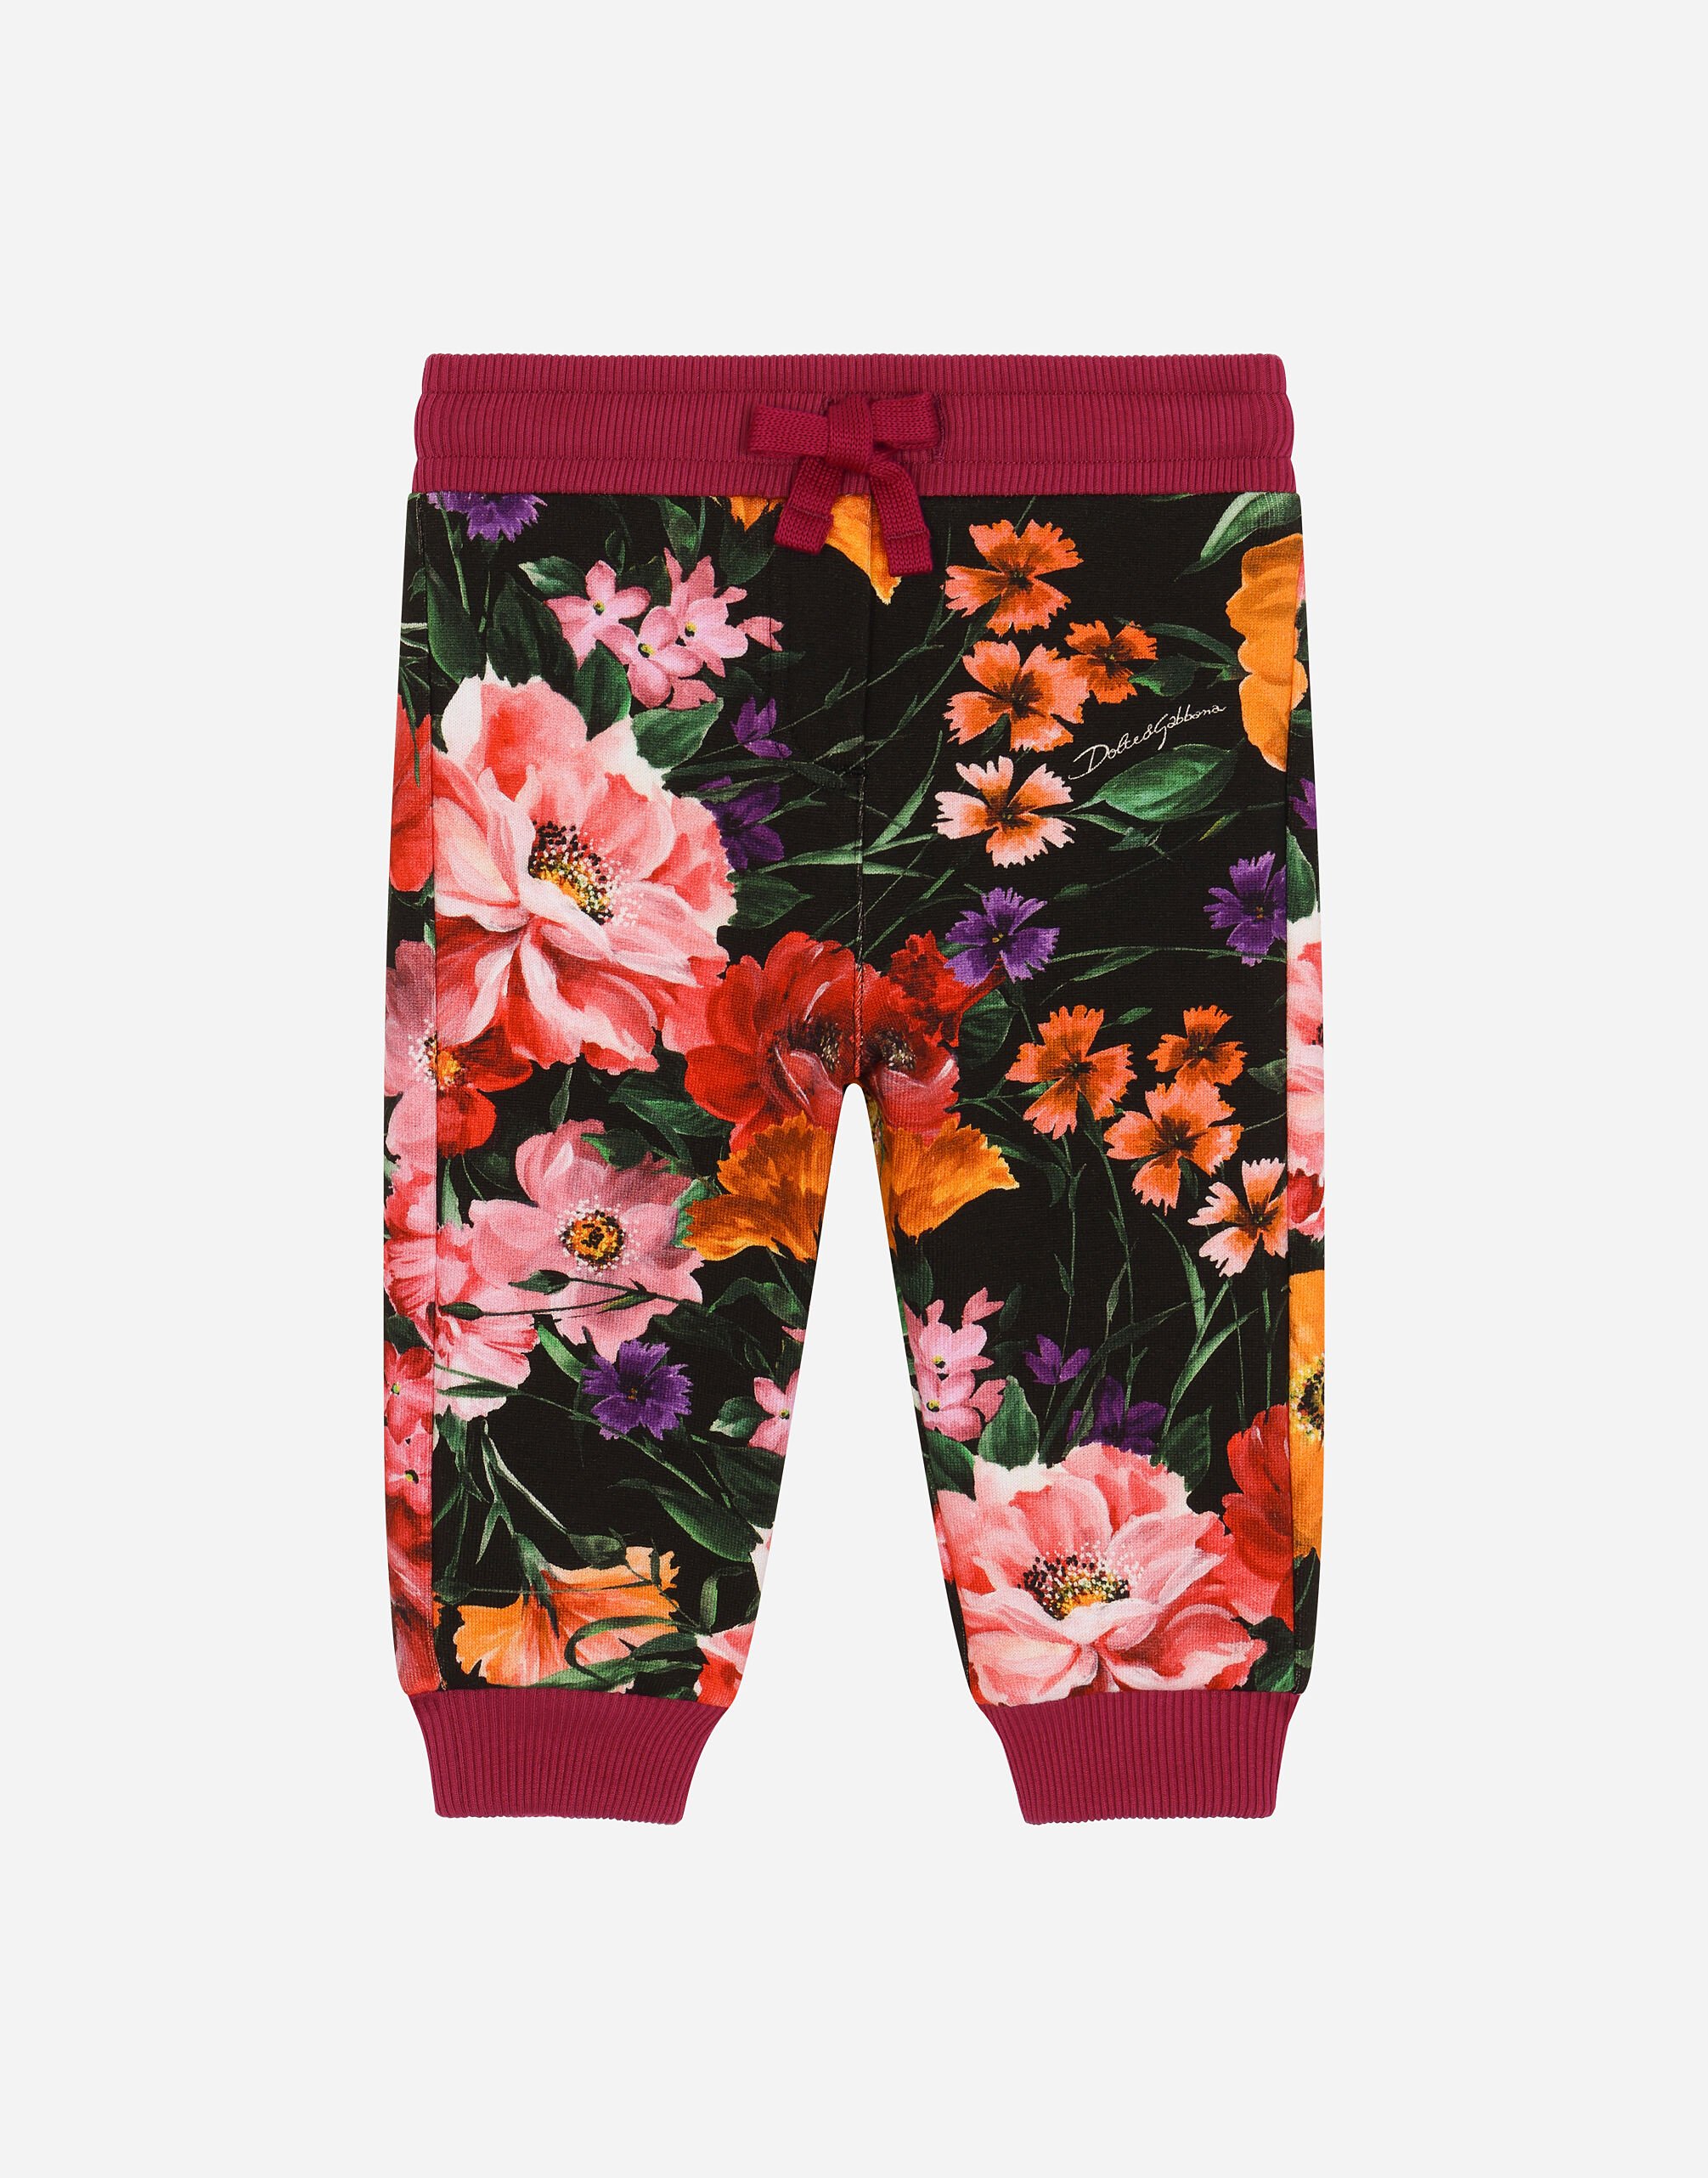 ${brand} Jersey jogging pants with floral print over a black background ${colorDescription} ${masterID}